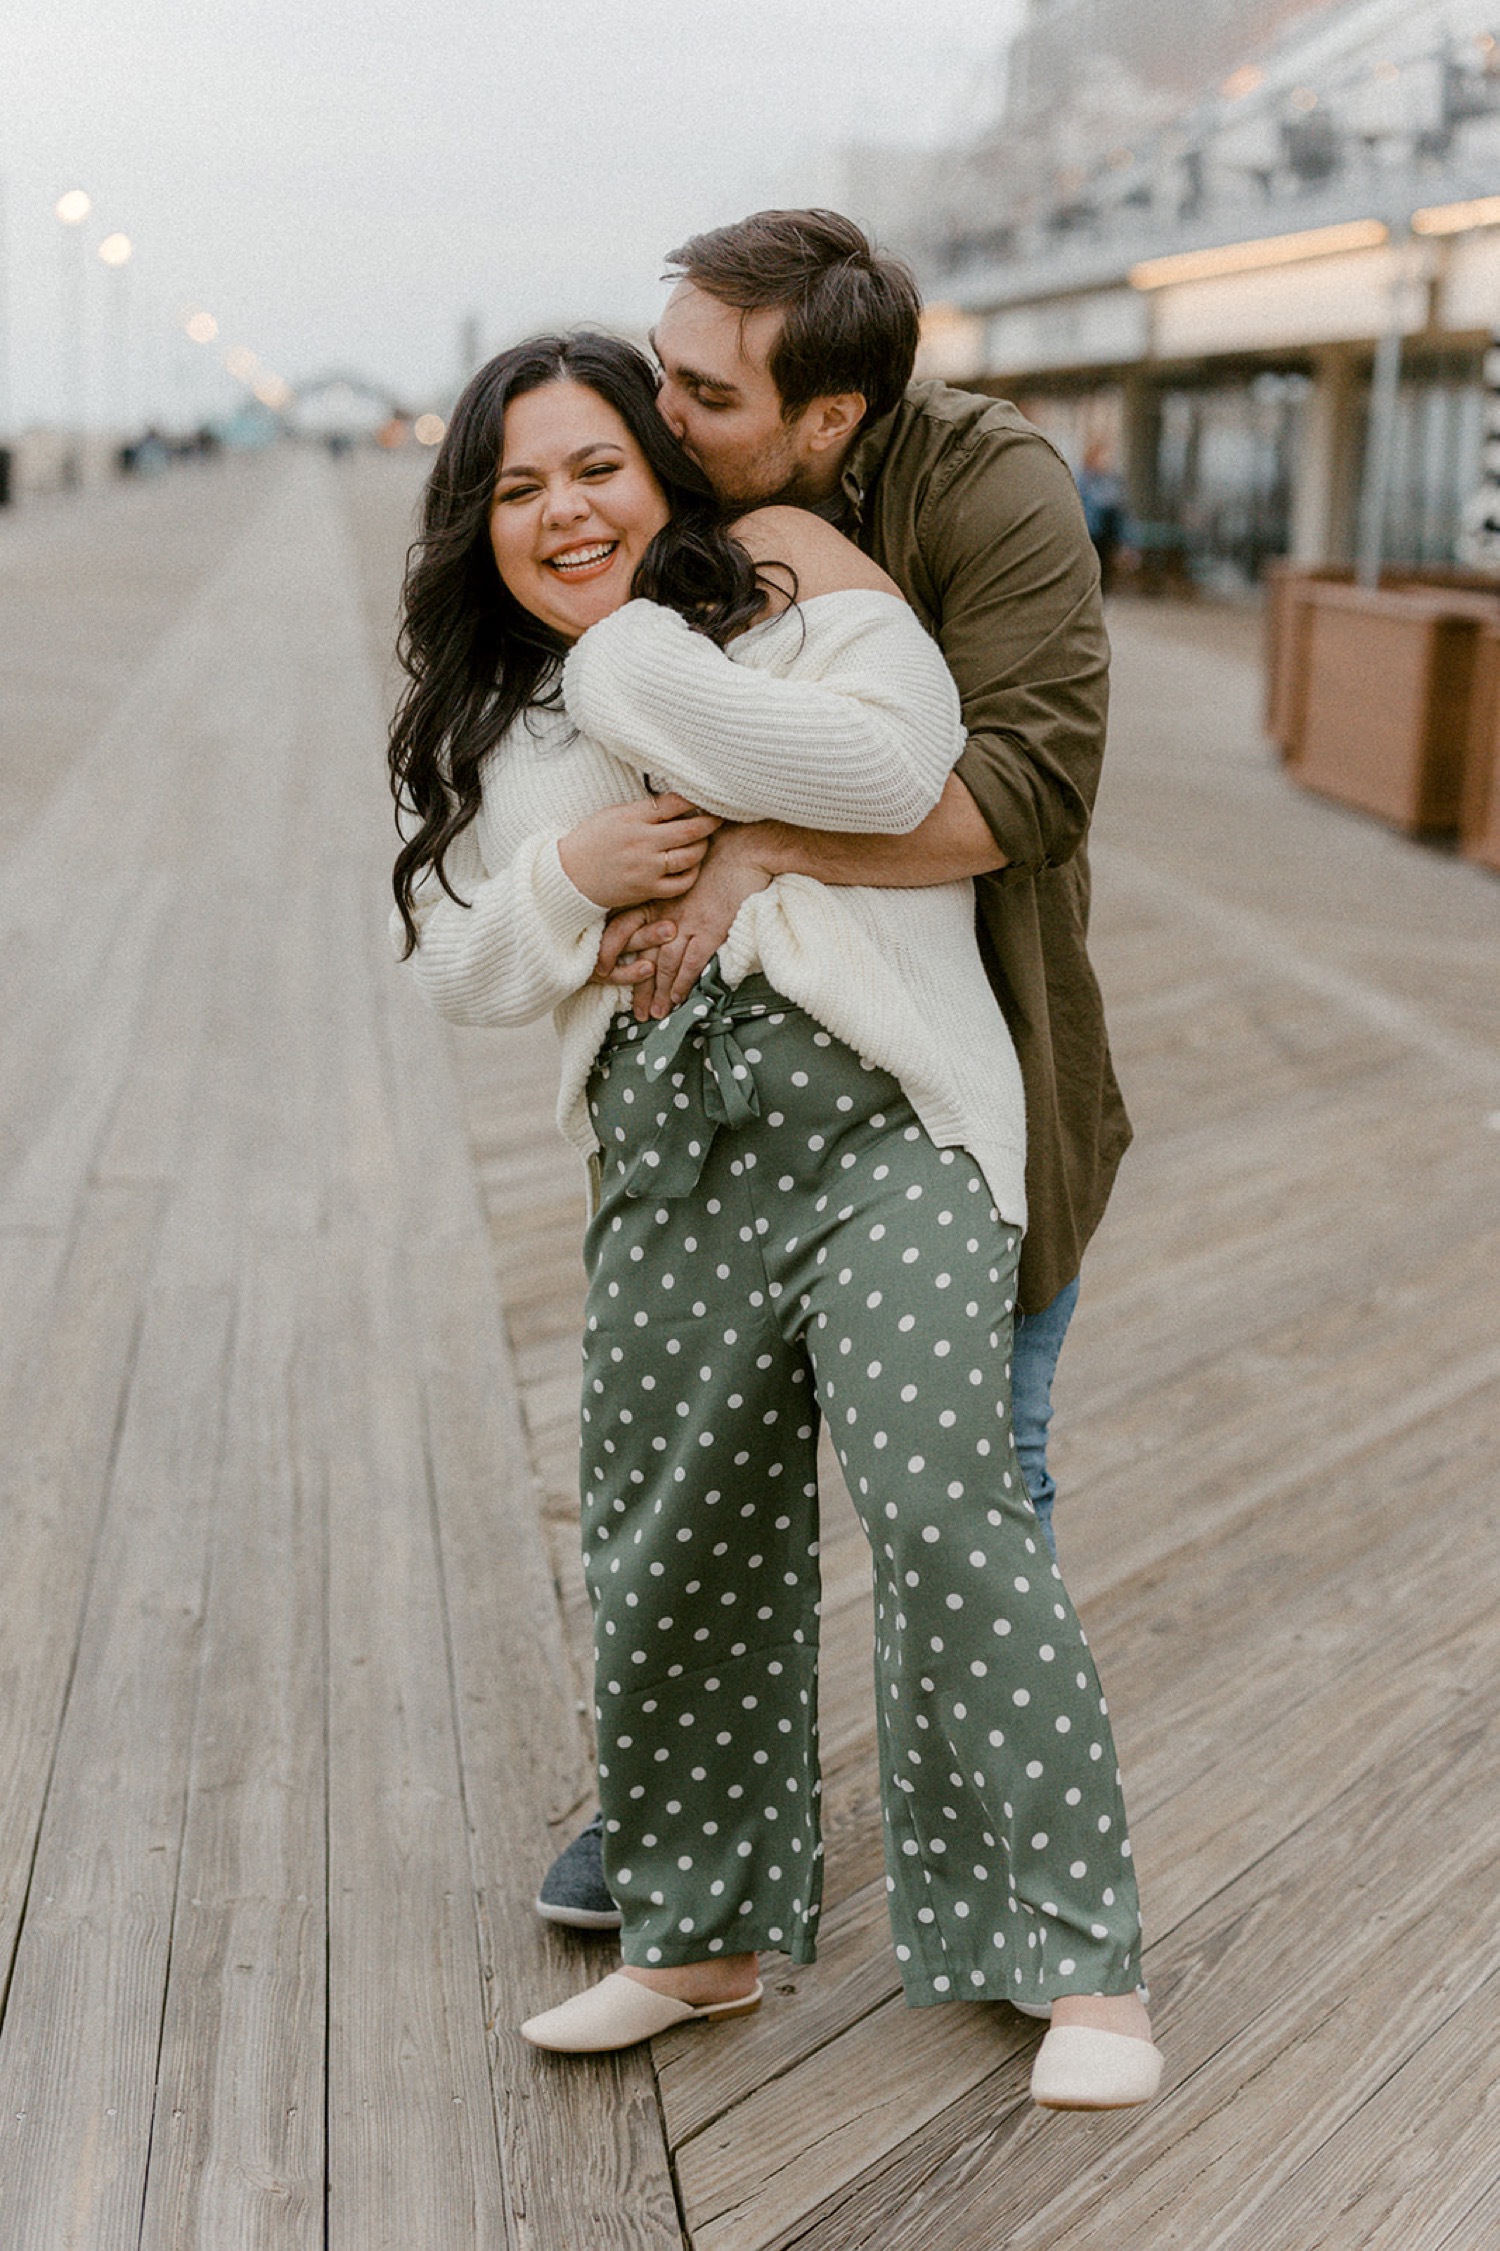 couple laughing swaying embrace on boardwalk cozy